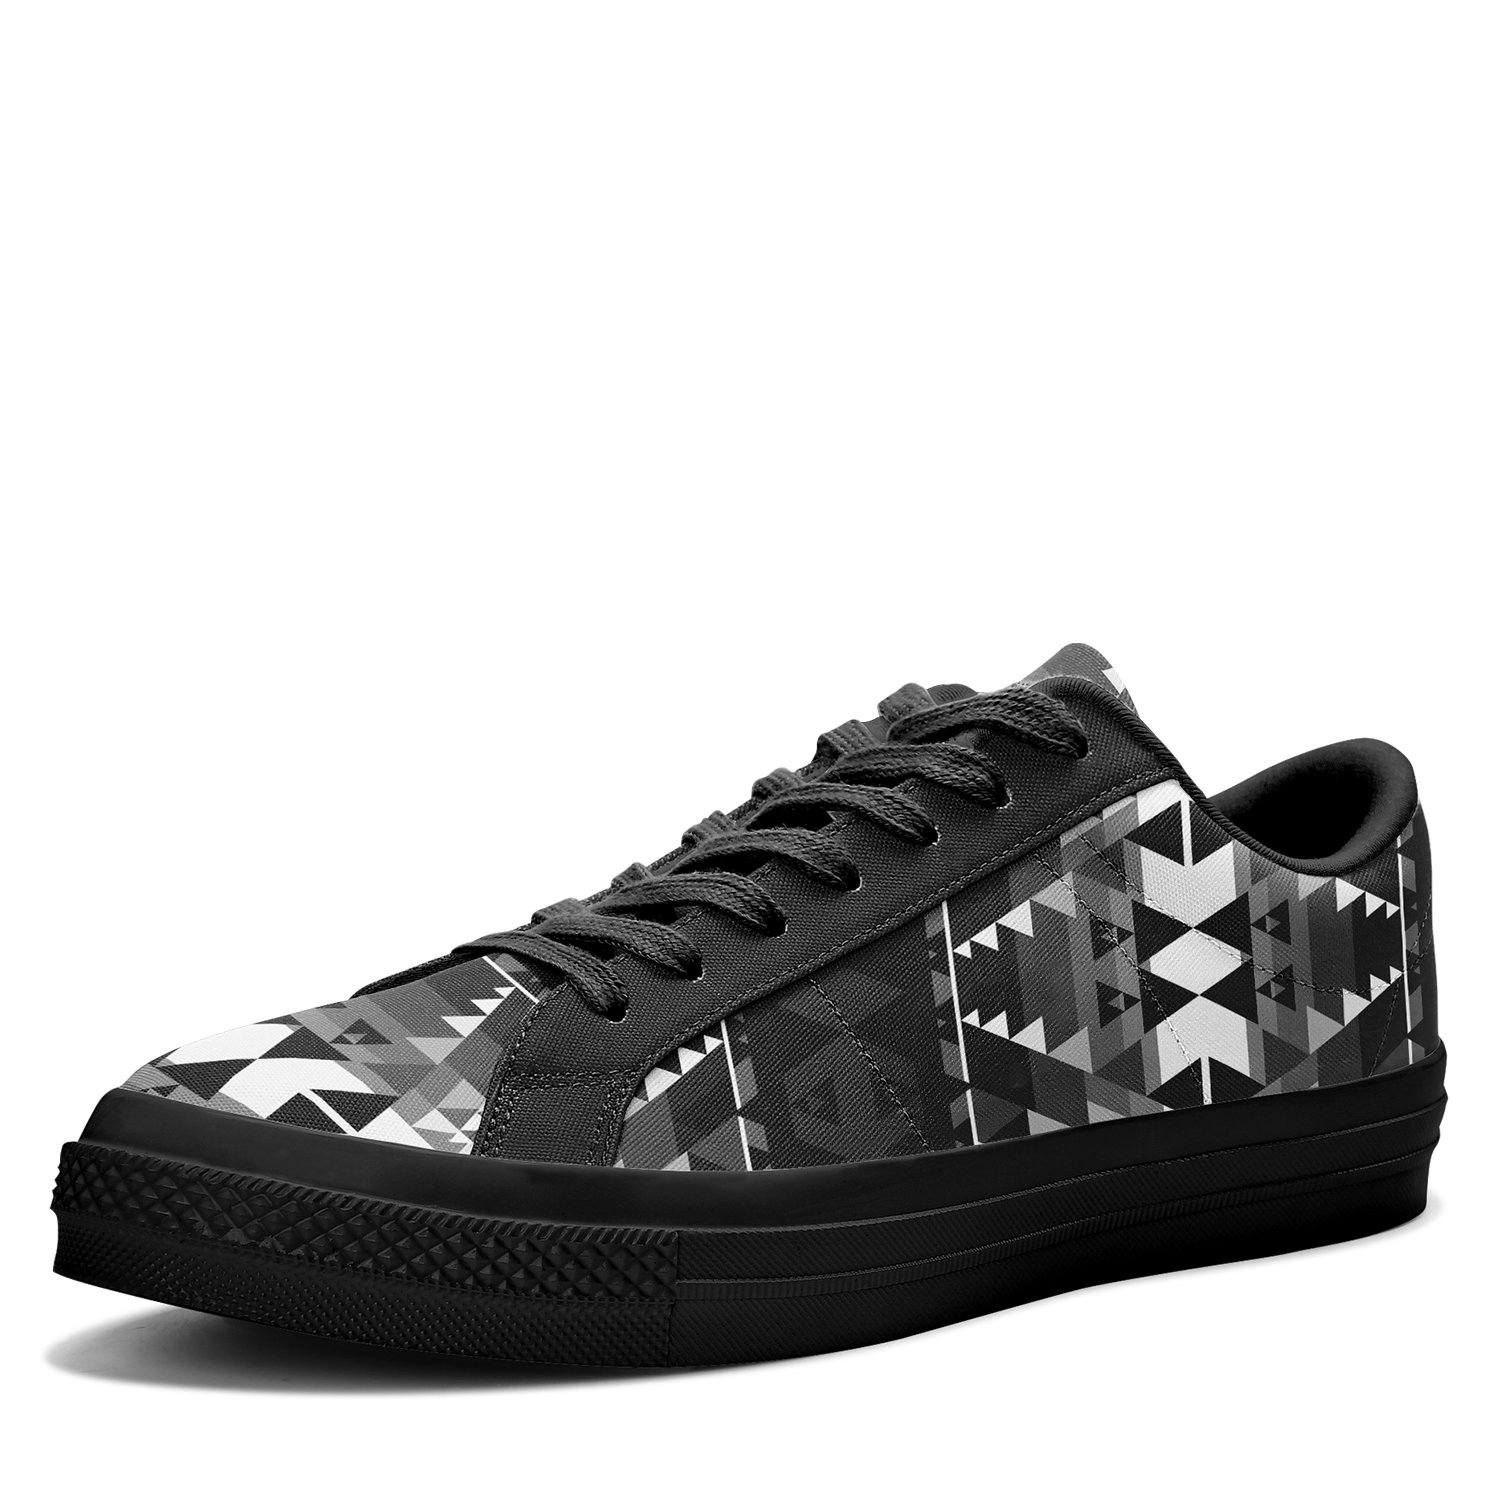 Writing on Stone Black and White Aapisi Low Top Canvas Shoes Black Sole 49 Dzine 